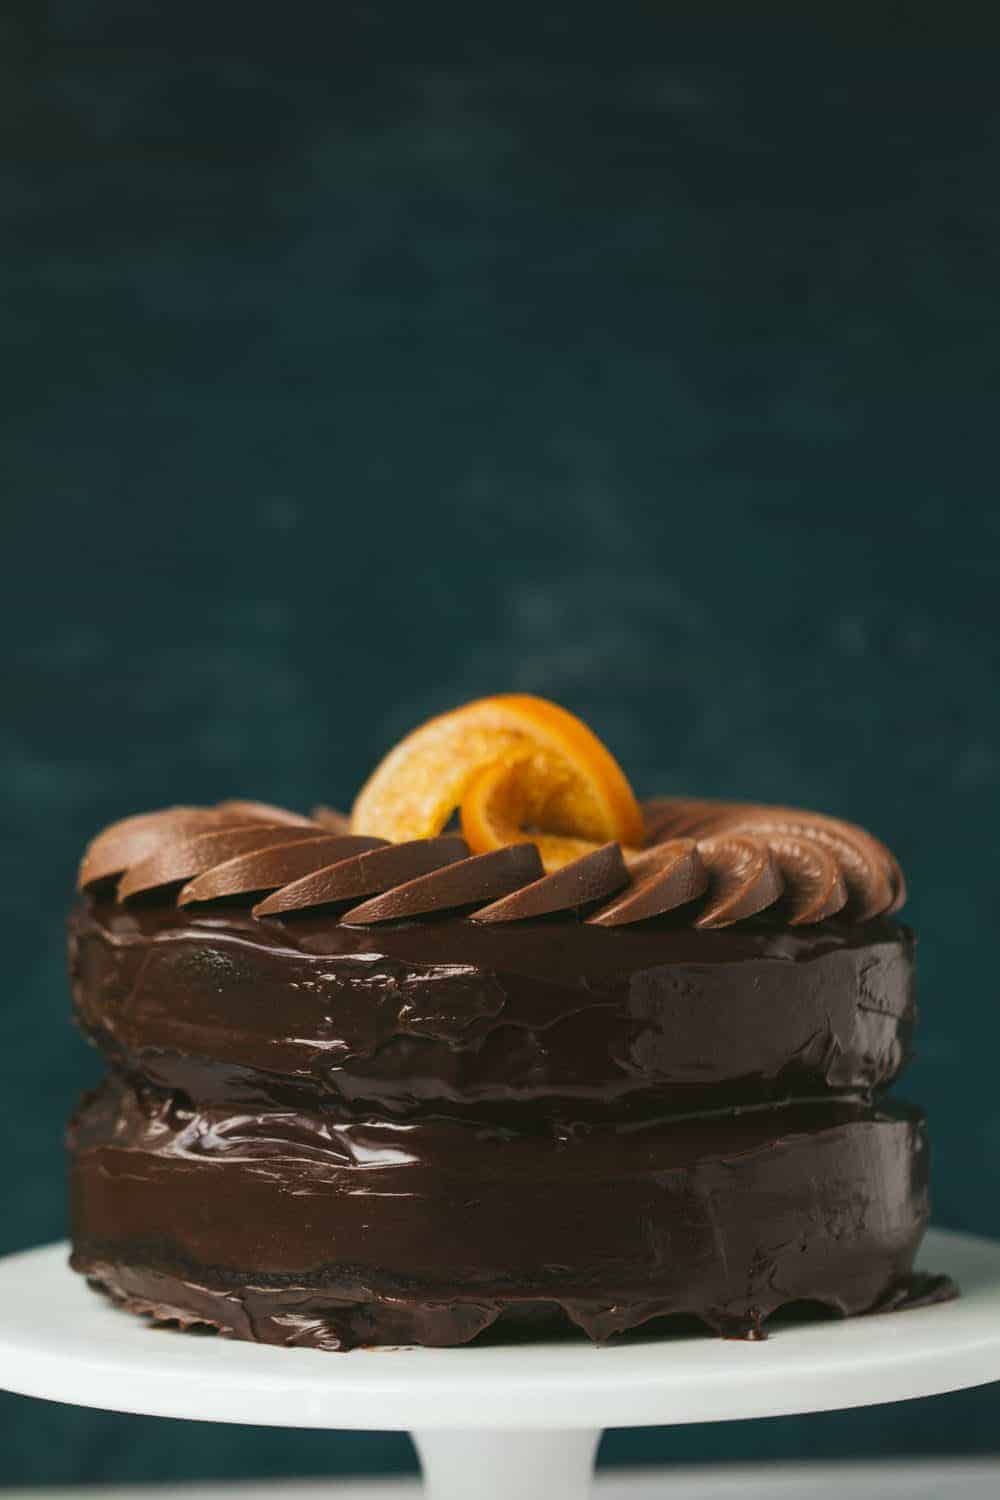 A 2 layer chocolate orange cake with a circle of Terry's chocolate orange segments decorating the top. There are 2 candied oranges in the centre.